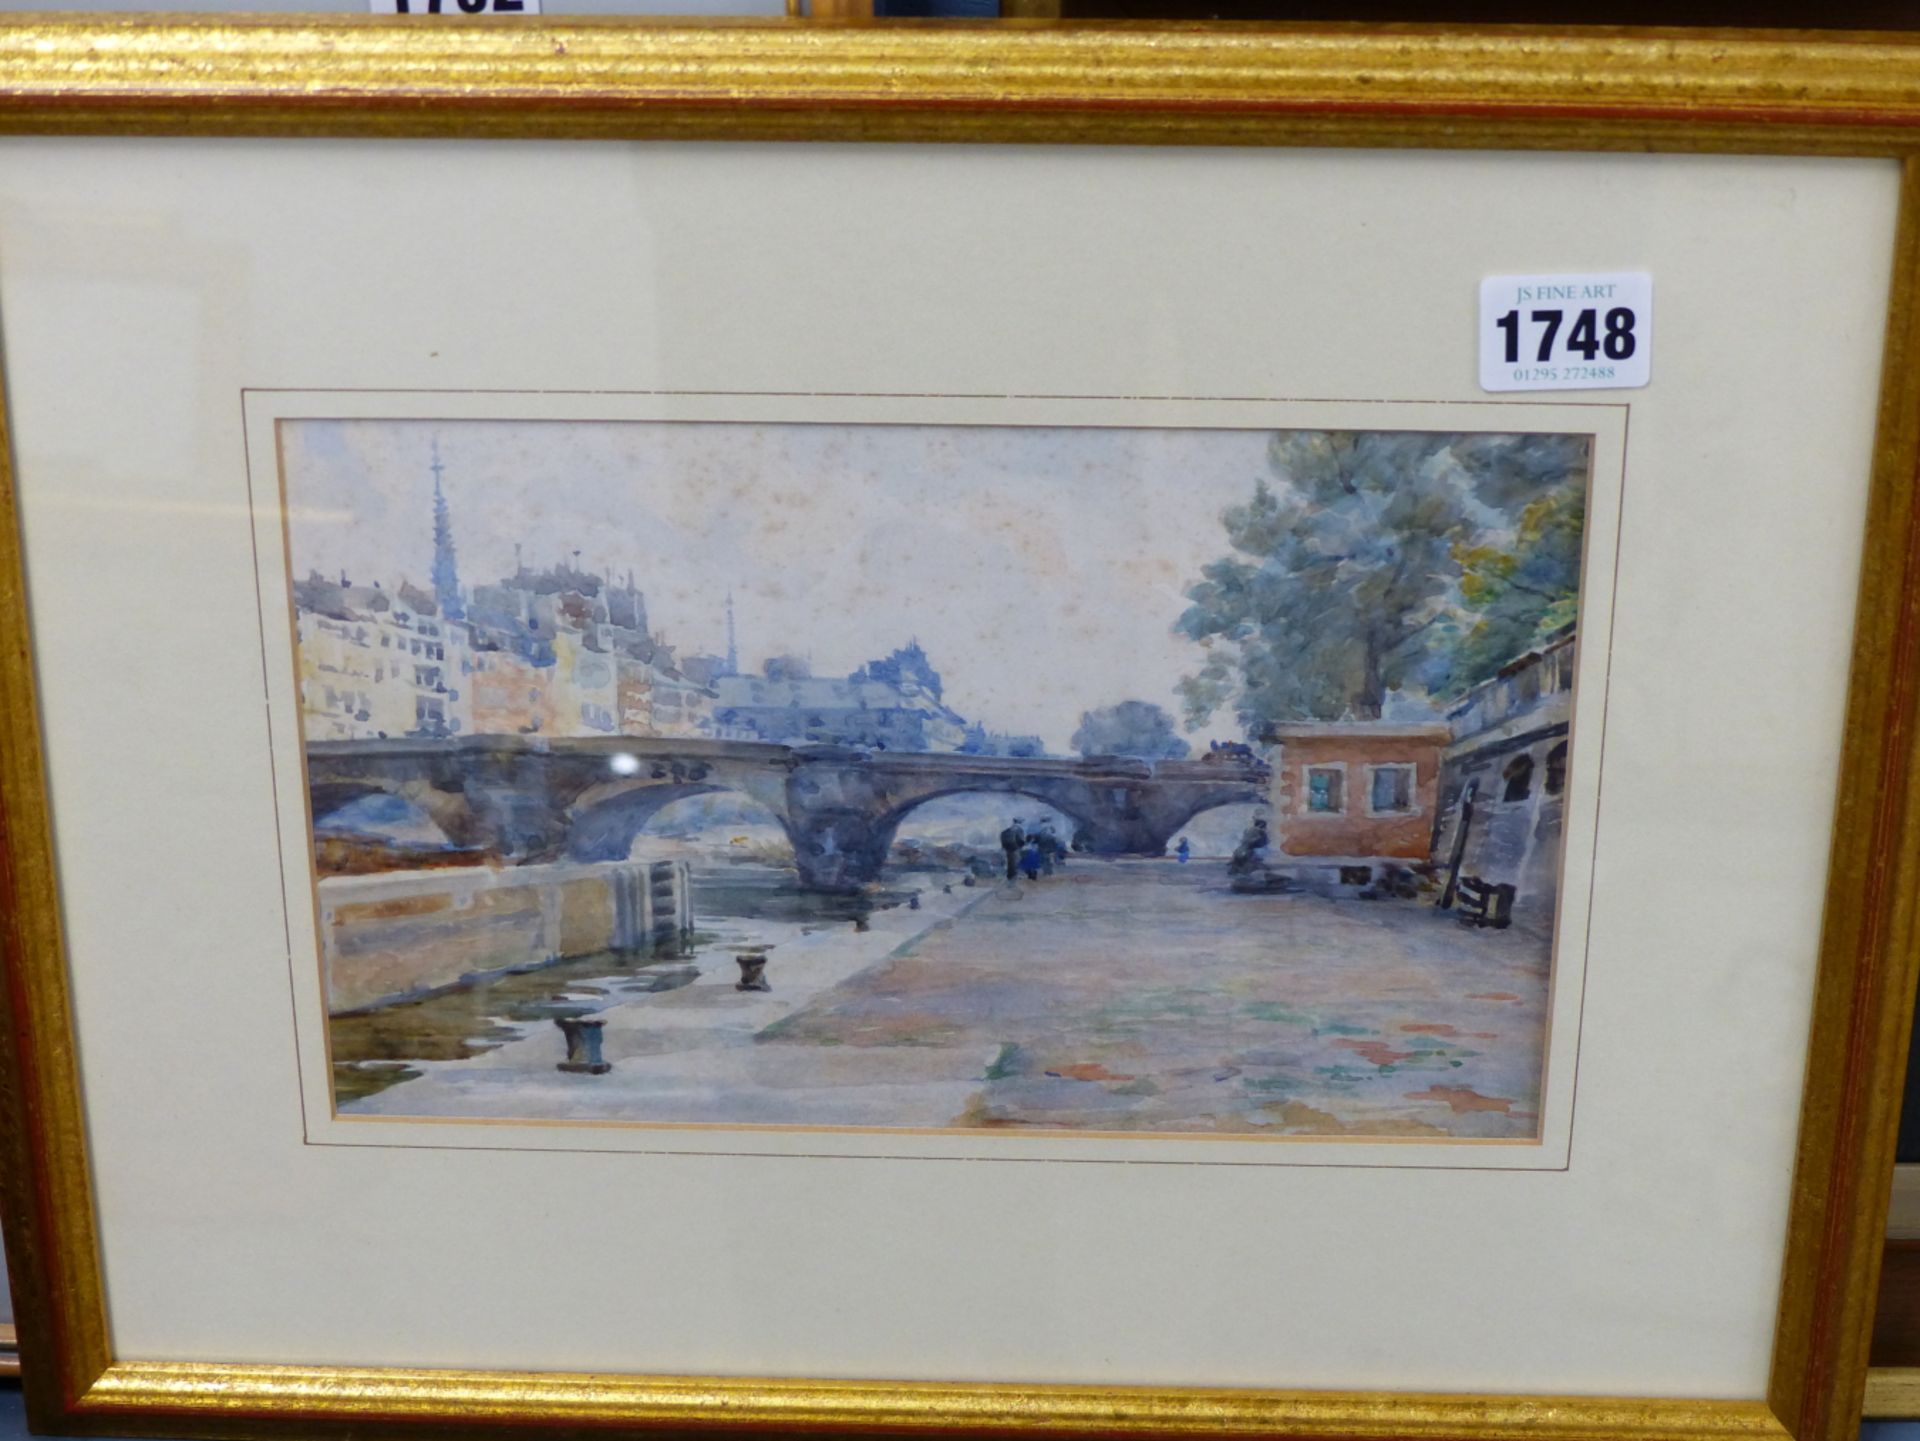 CONTINENTAL EARLY 20TH C. IMPRESSIONIST STYLE PARISIAN QUAYSIDE SCENE. WATERCOLOUR, 15 X 24 CM. - Image 2 of 2